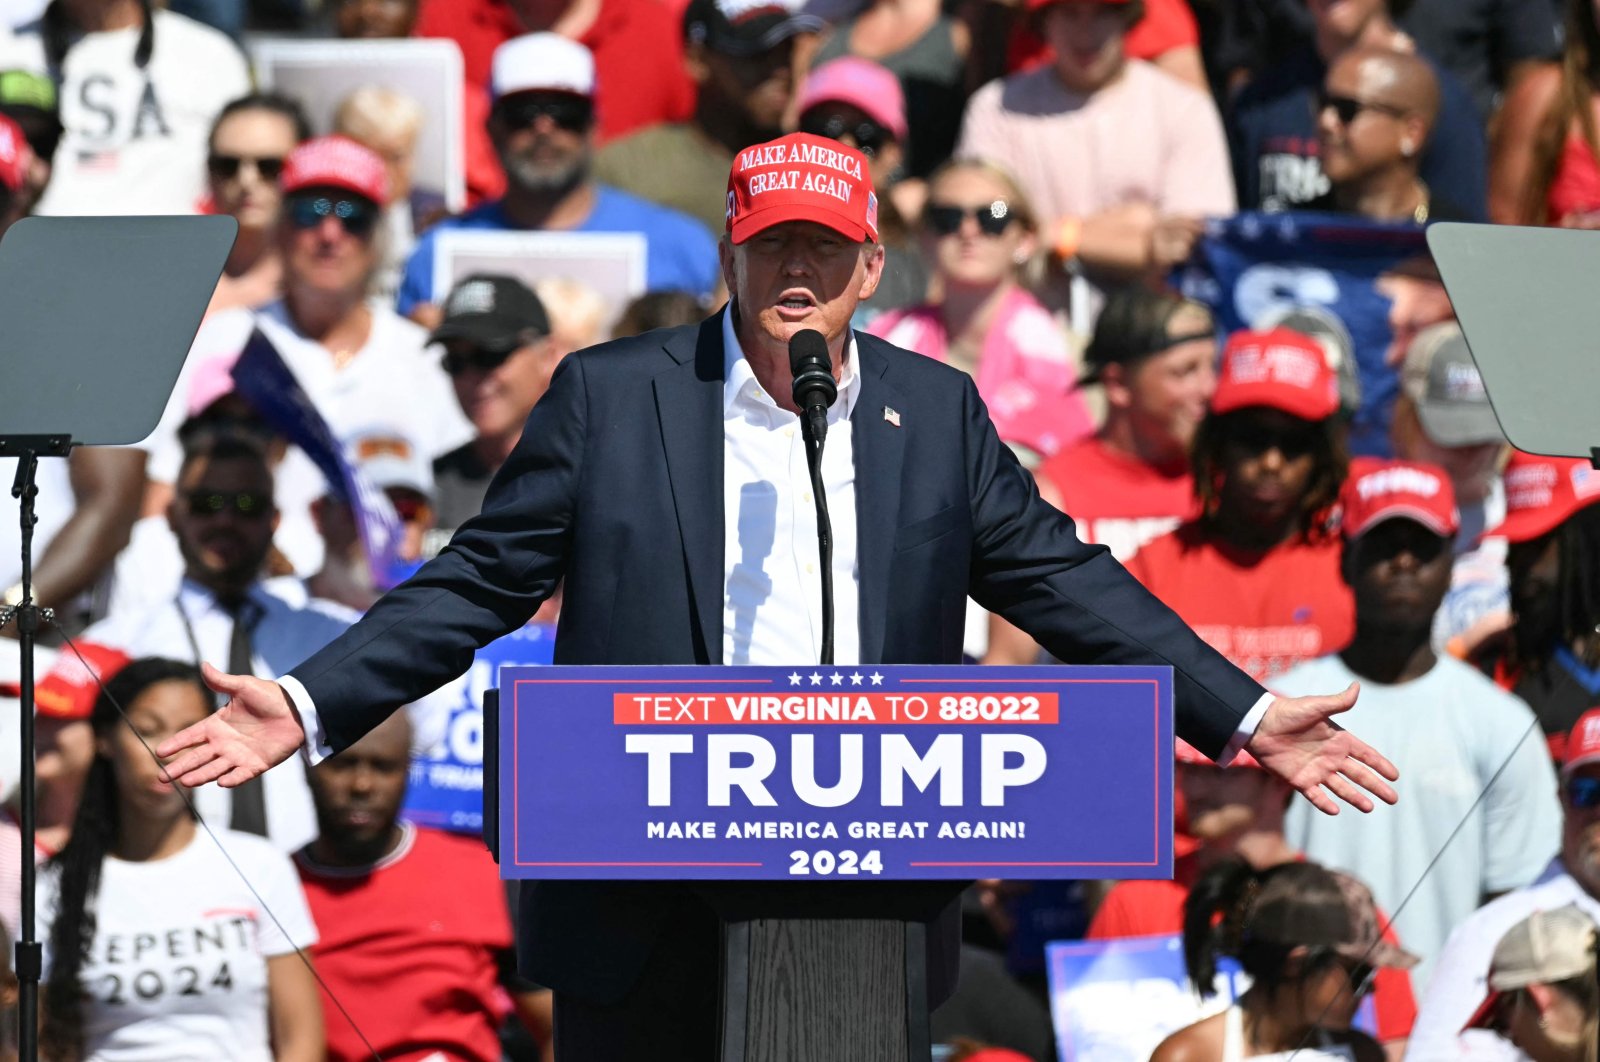 Former U.S. President and Republican presidential candidate Donald Trump speaks at a rally in Chesapeake, Virginia, U.S., July 28, 2024. (AFP Photo)